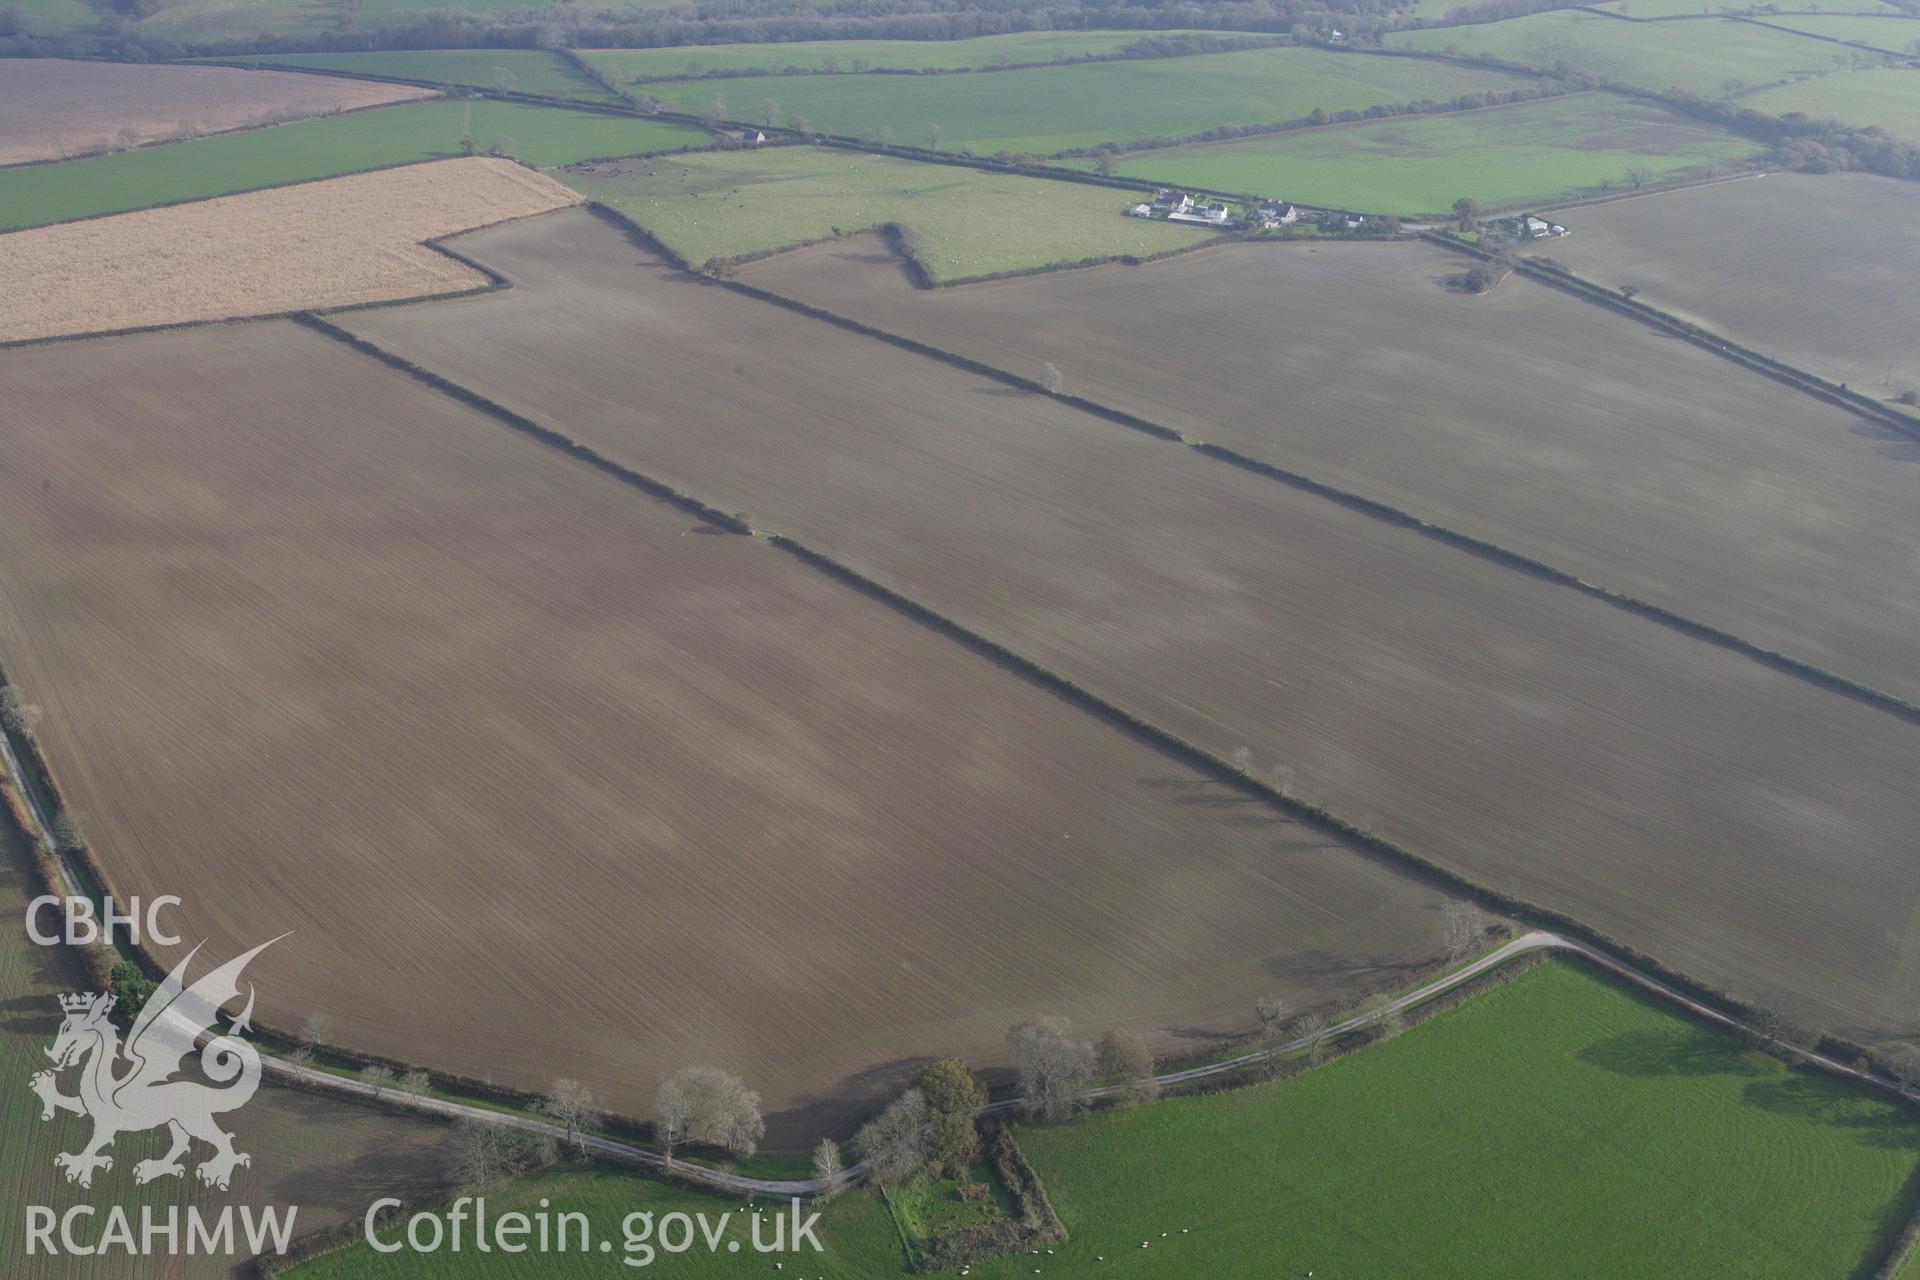 RCAHMW colour oblique aerial photograph of Cawrence Cropmark Enclosure. Taken on 09 November 2009 by Toby Driver